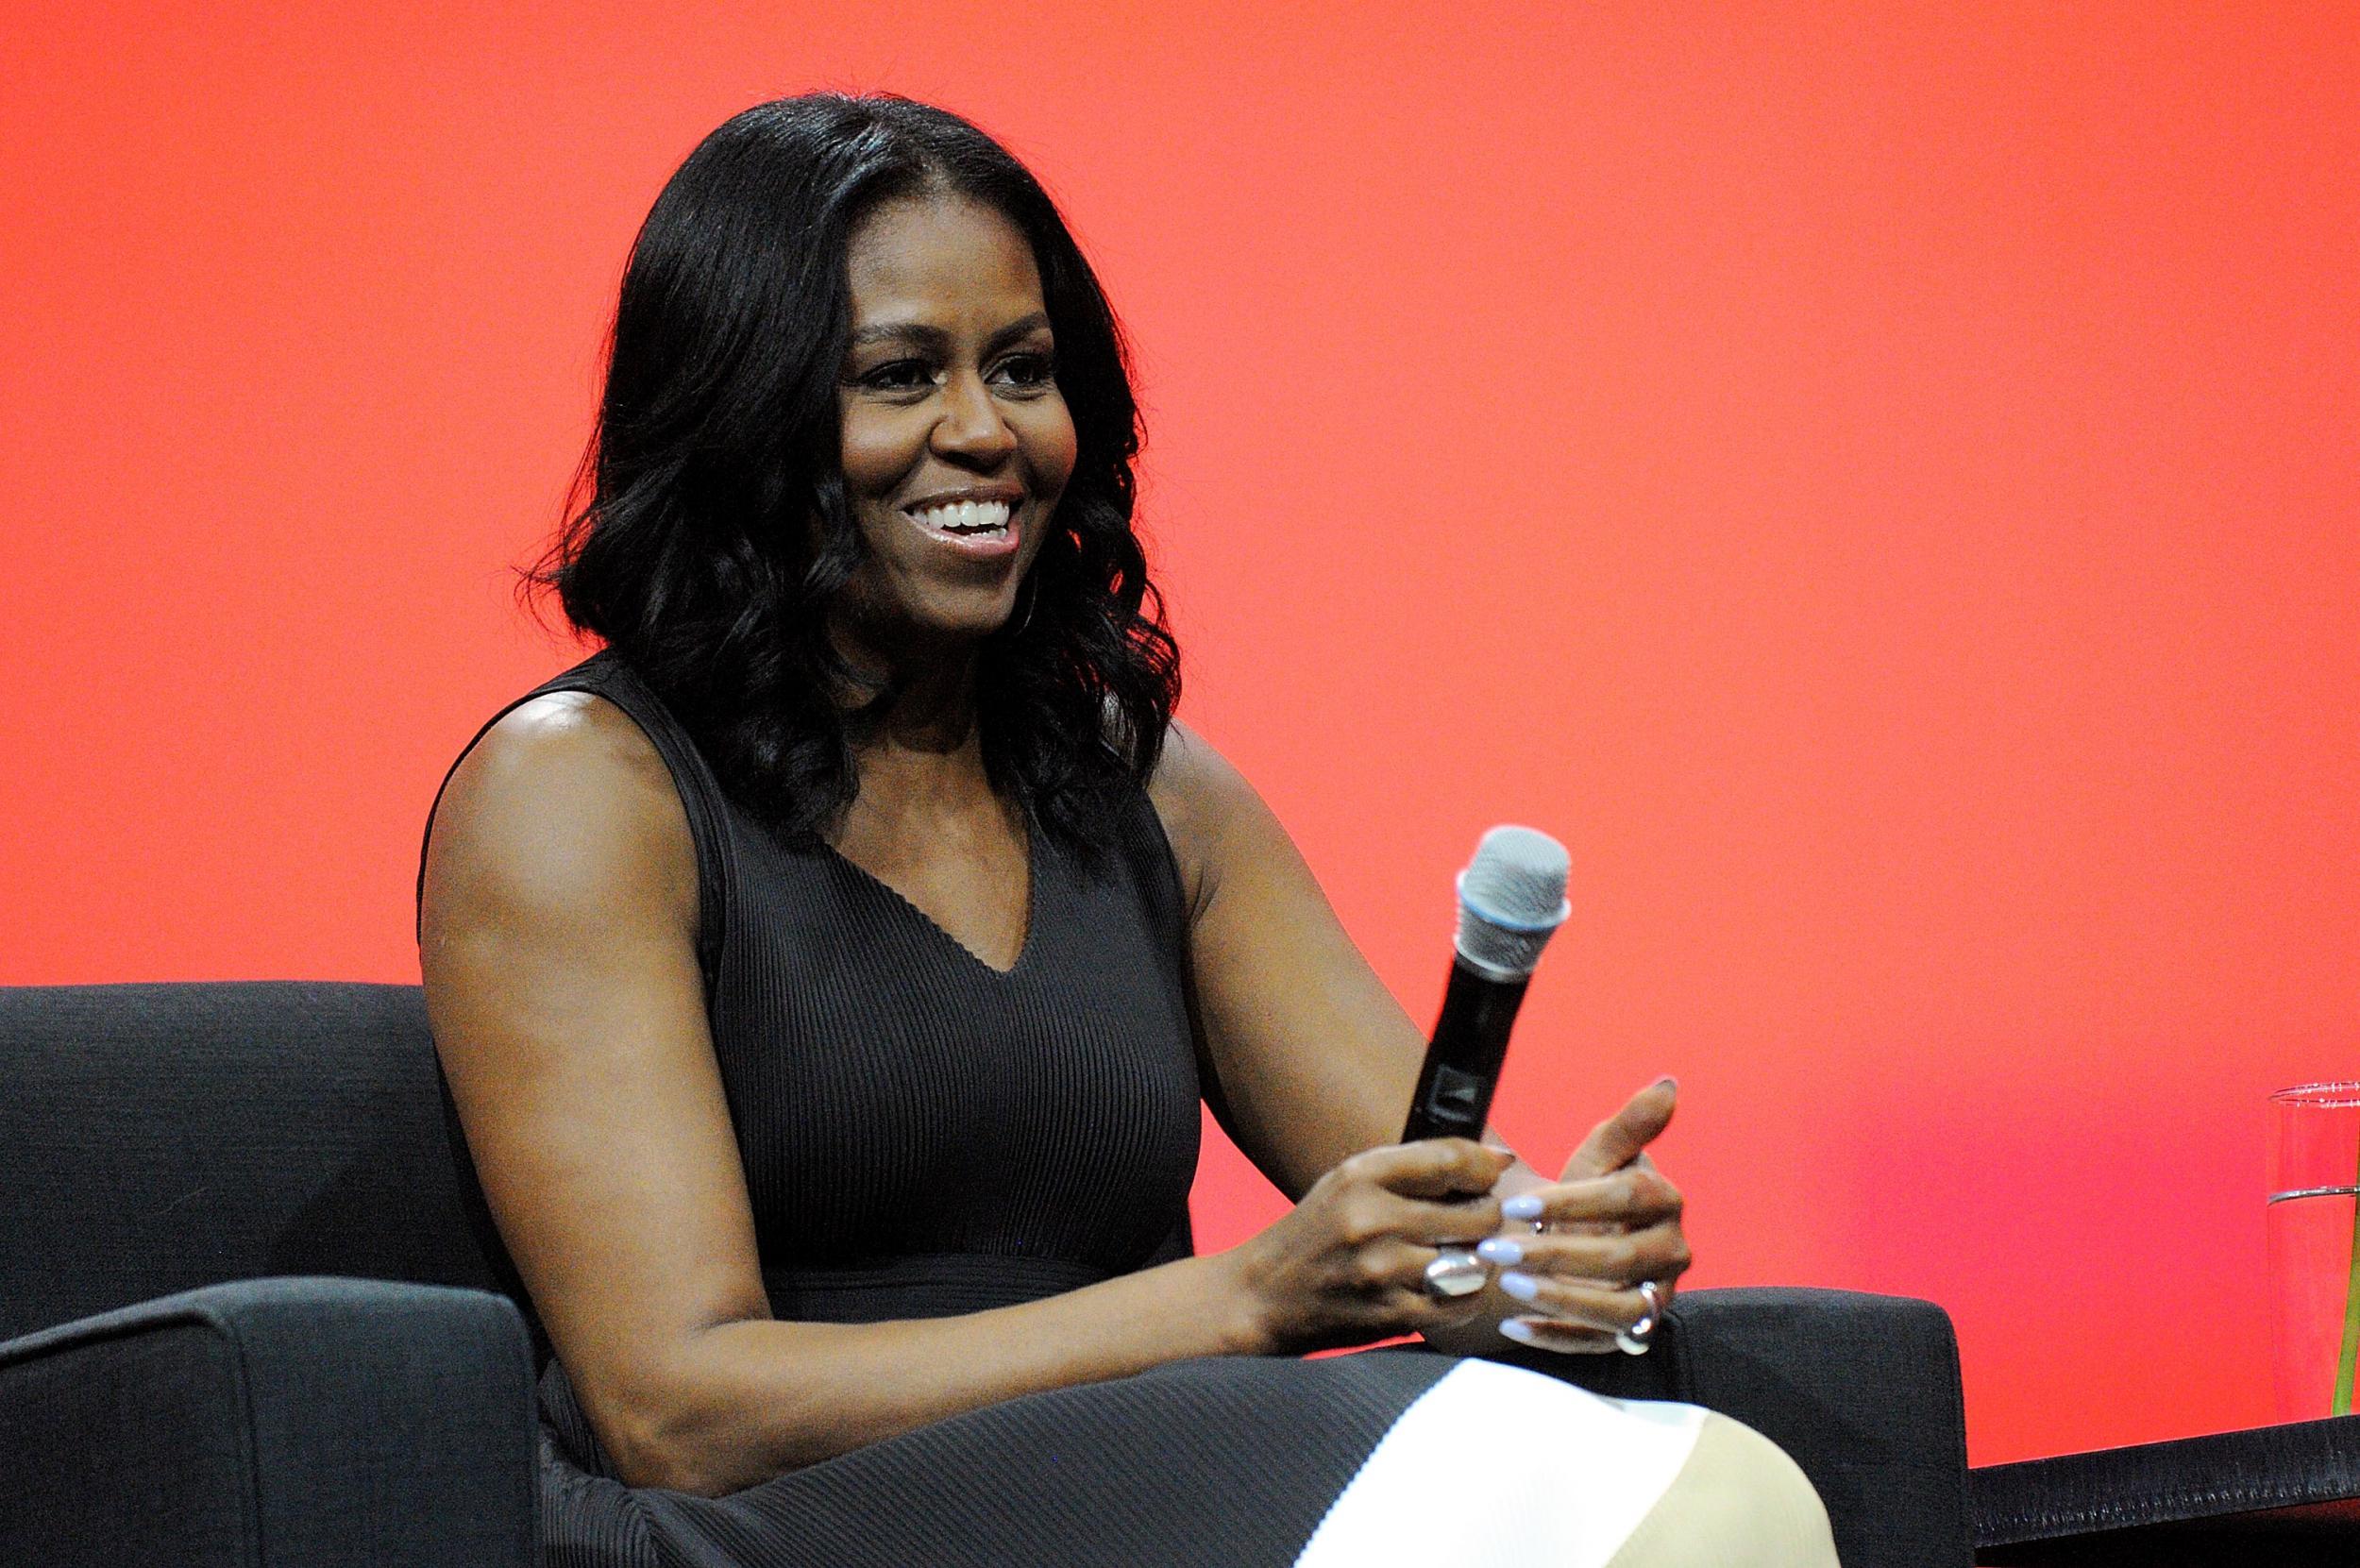 Michelle Obama thanks 33-year-old, who is fifth in line to the throne, for coming to her hometown of Chicago as a surprise guest for the student